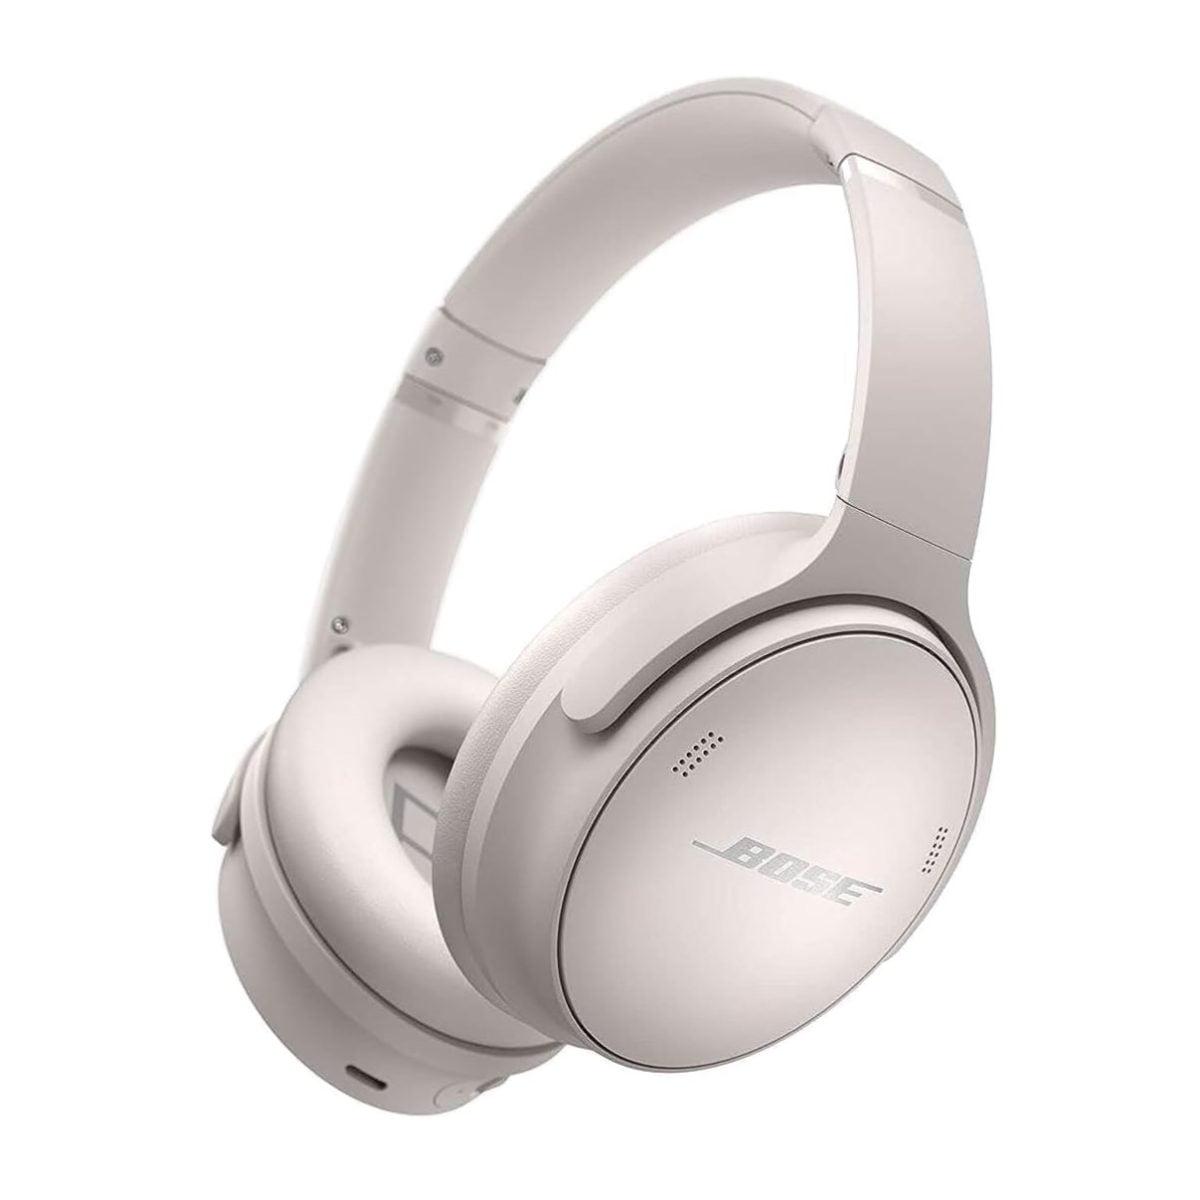 Bose Quietcomfort 45 Wireless Noise Cancelling Over-The-Ear Headphones